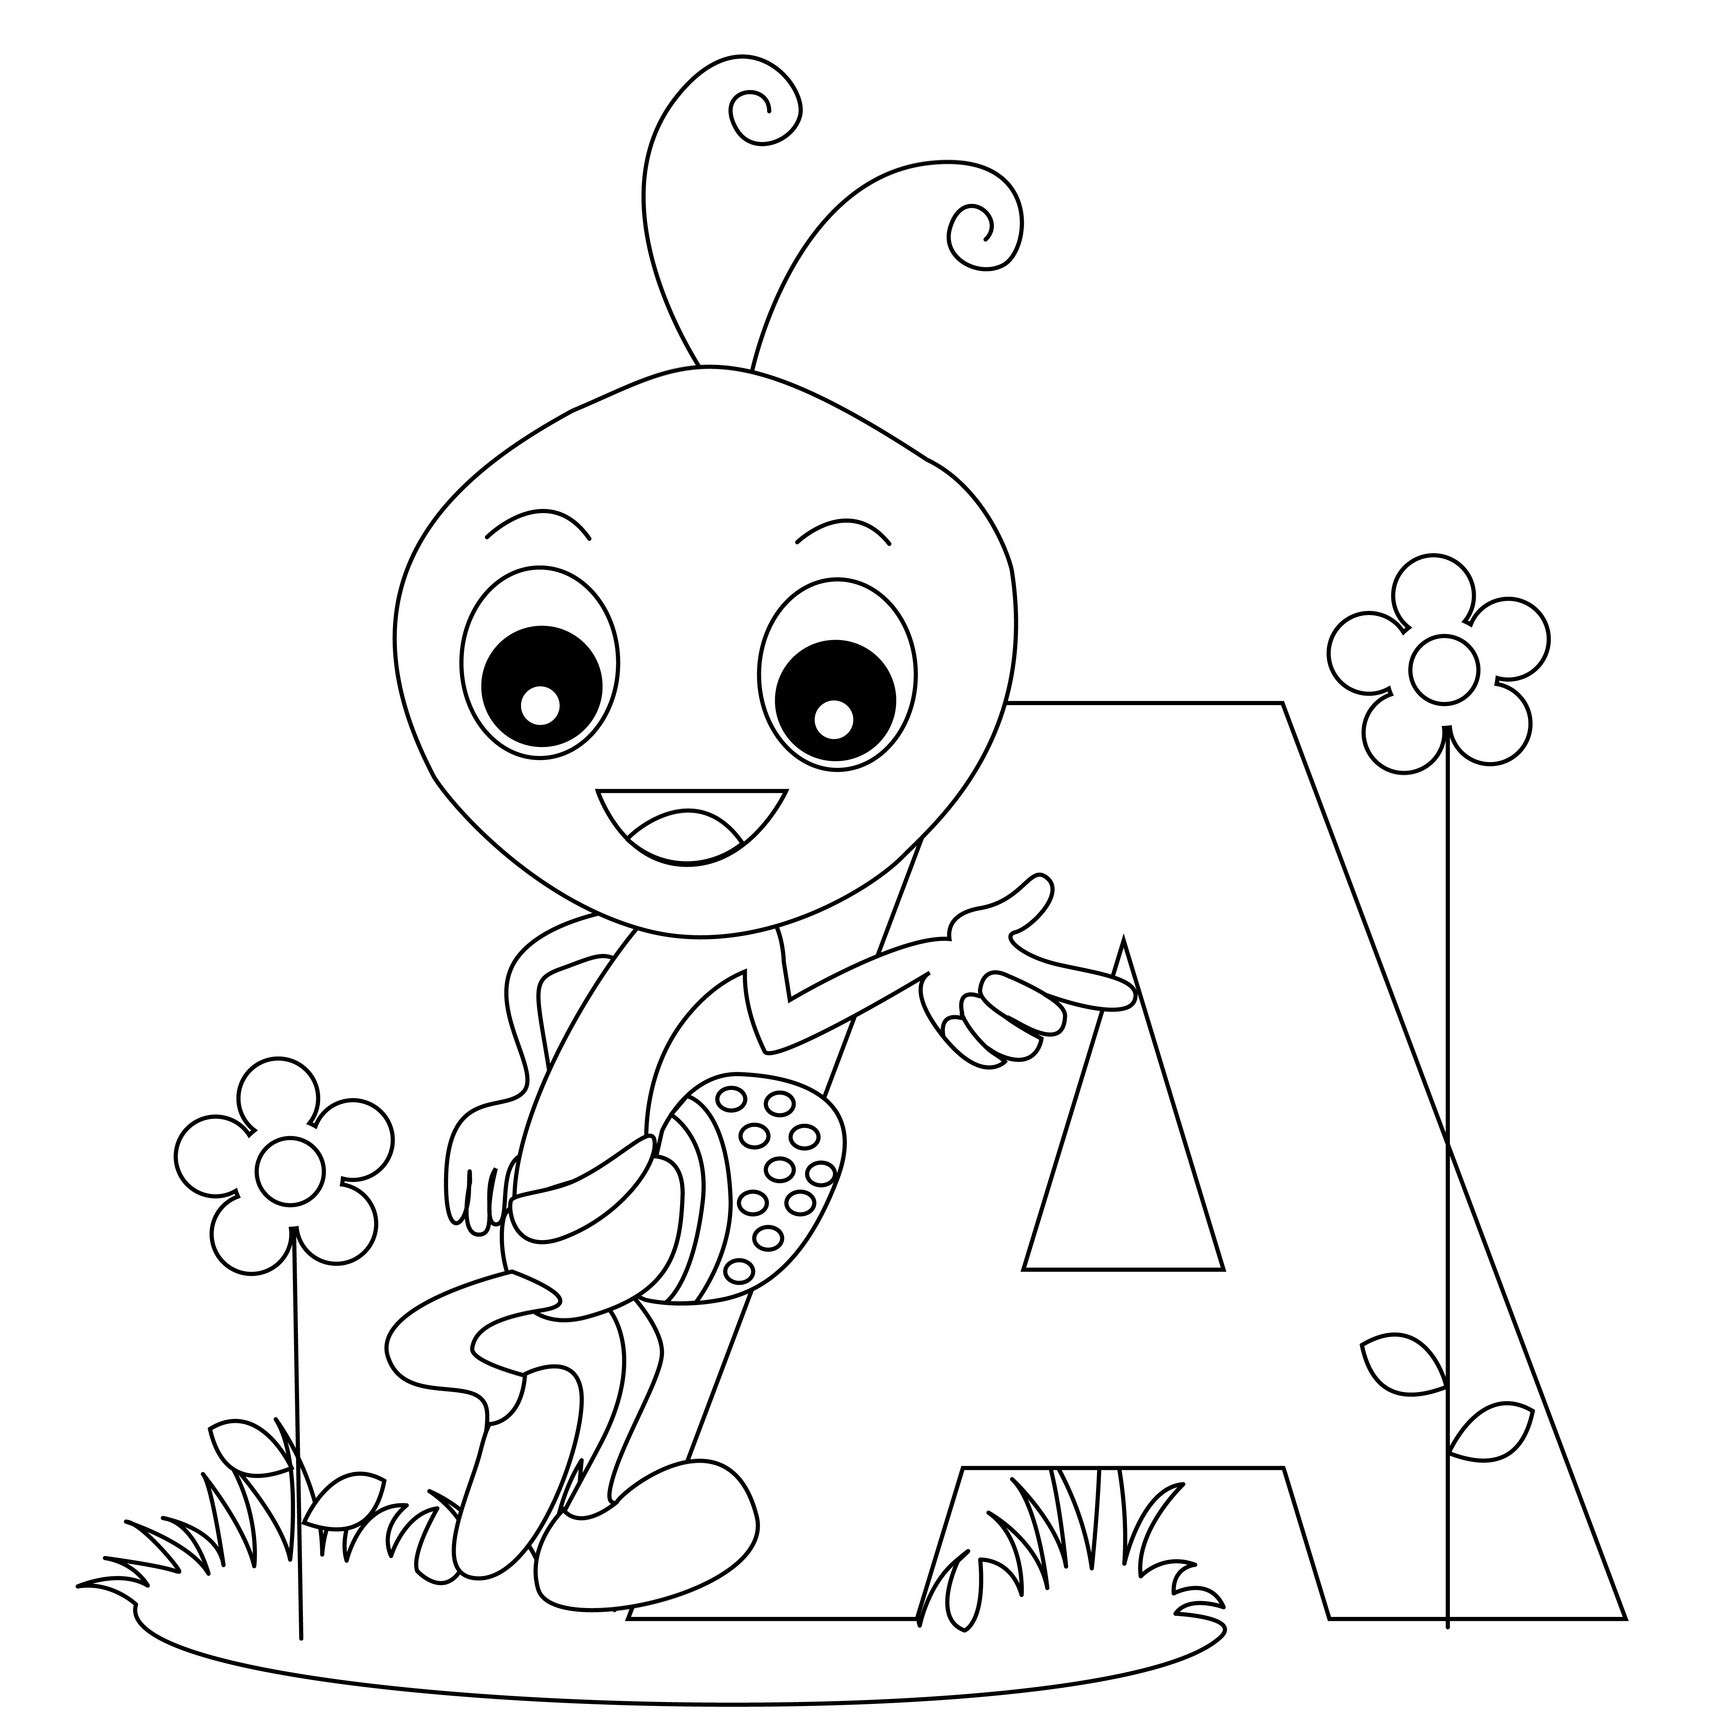 free-printable-alphabet-coloring-pages-for-kids-best-coloring-pages-for-kids